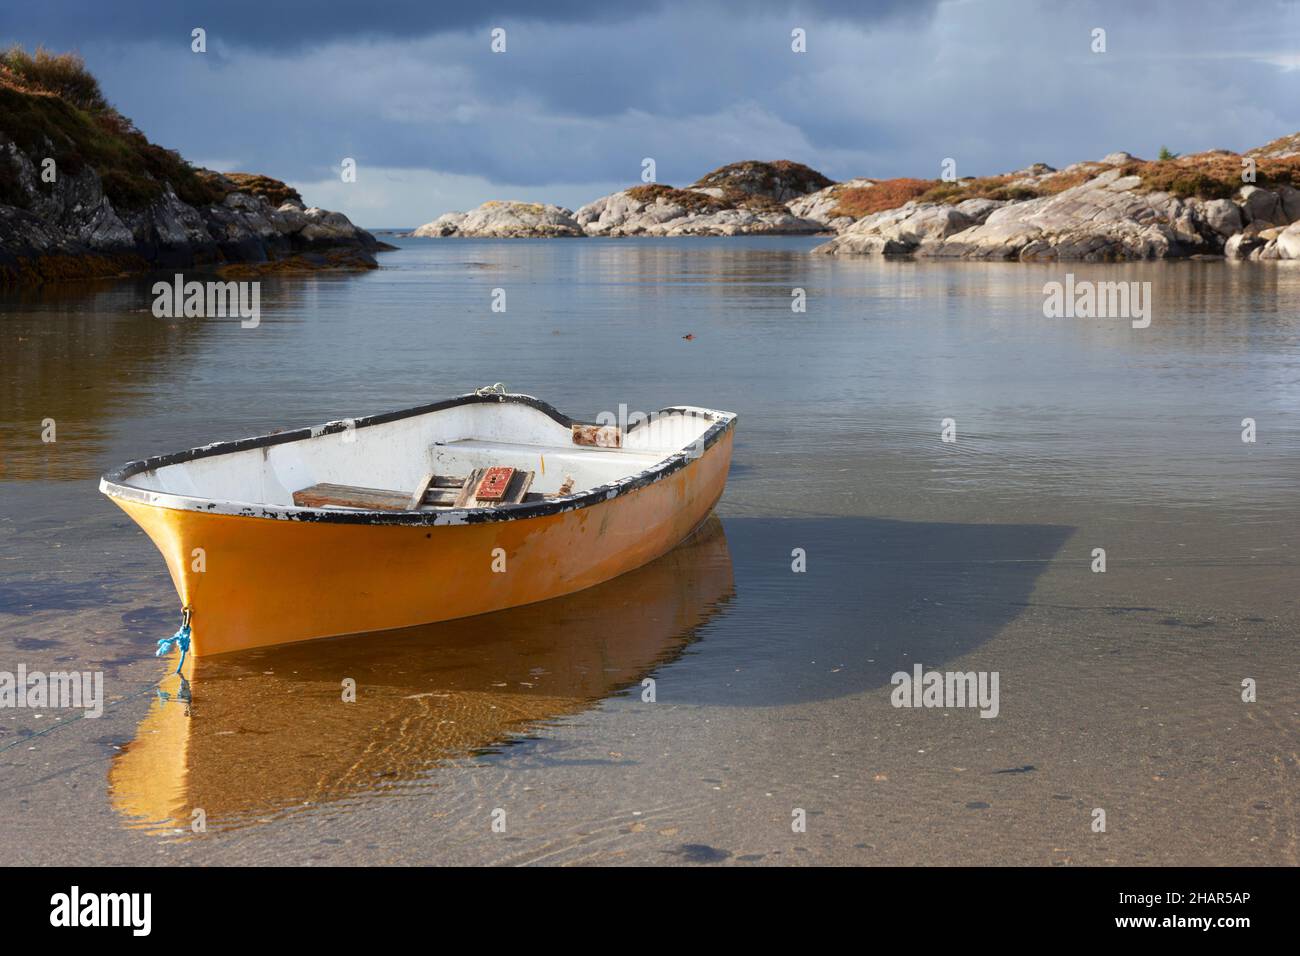 A rowing boat rises on the incoming tide at an Ardtoe sandy cove on the west coast of the Arnamurchan Peninsula, West Scotland Stock Photo